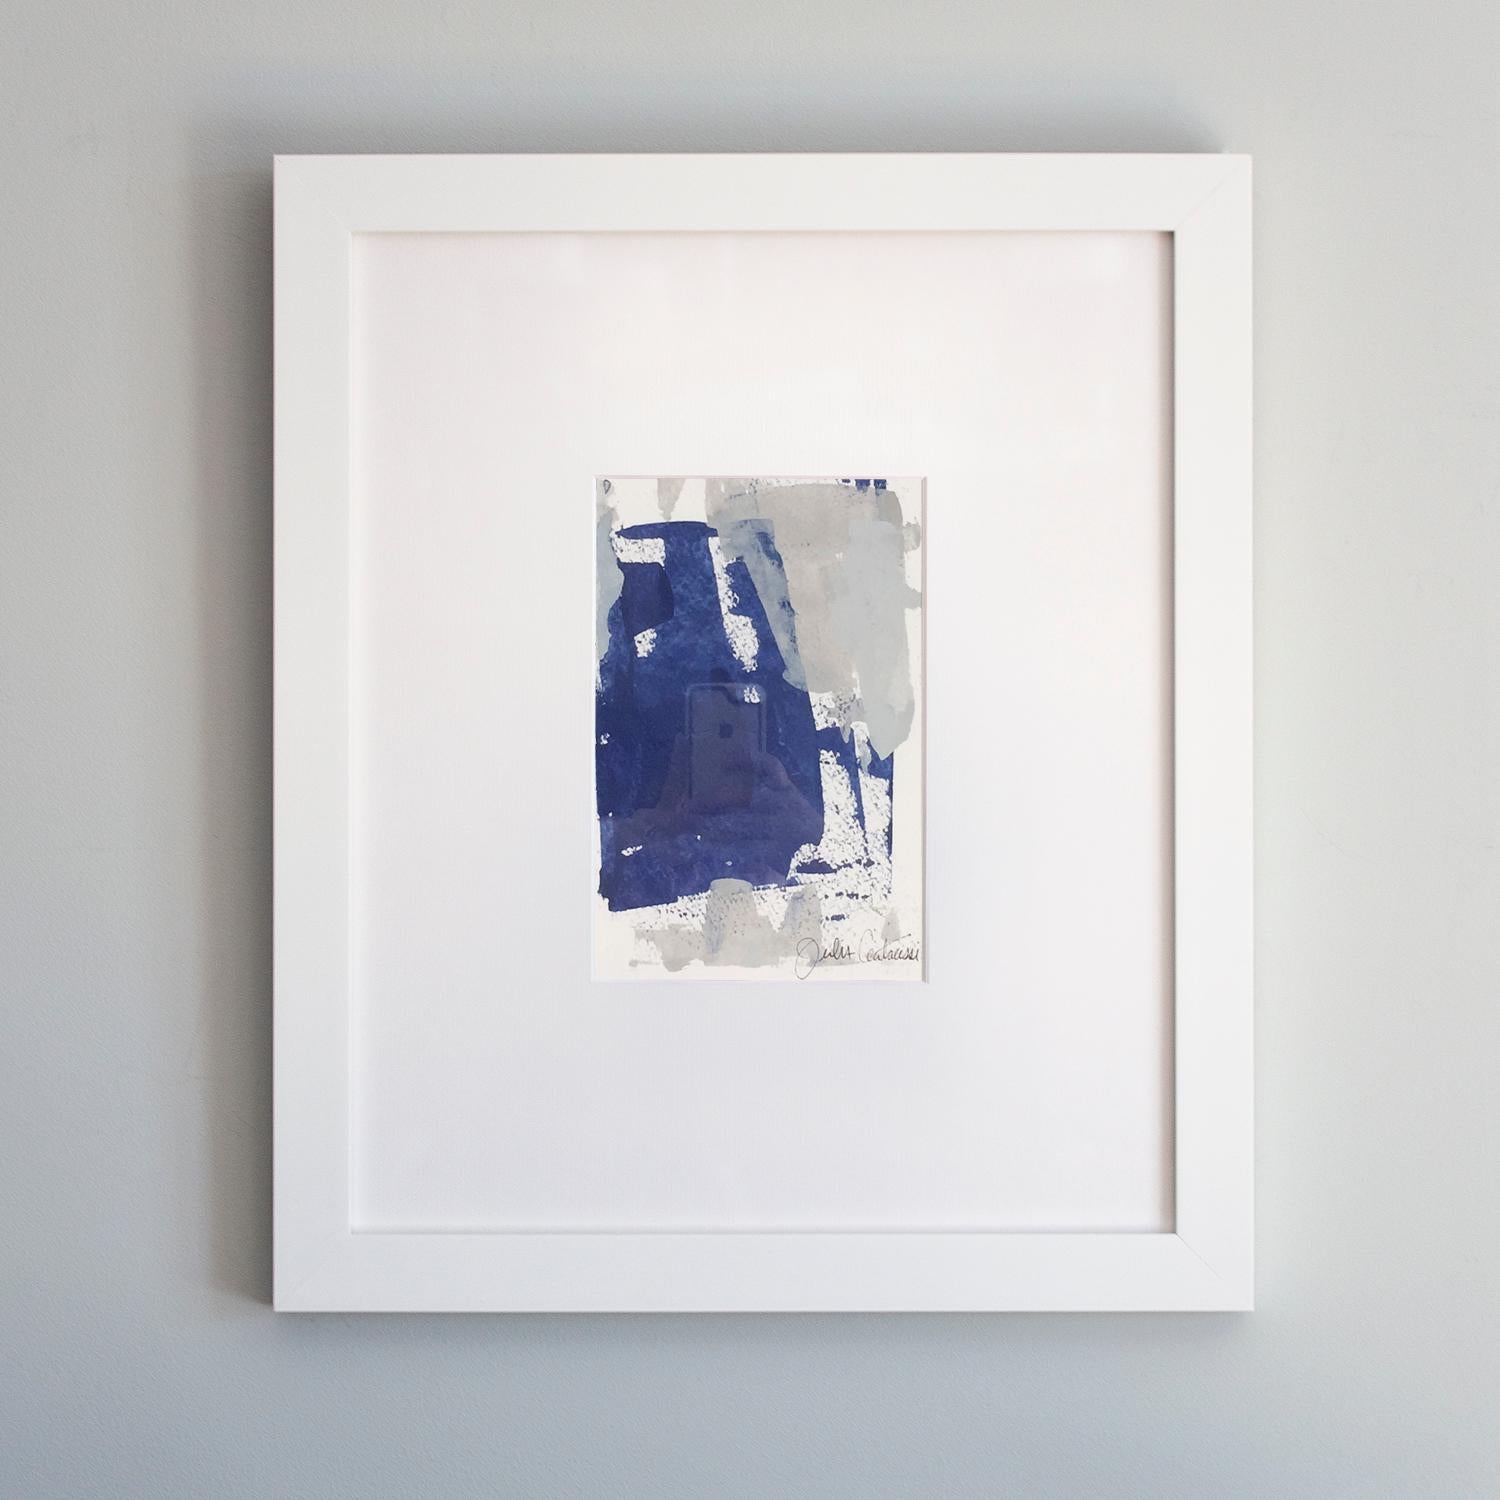 Abstract, abstract art, blue, royal blue, deep blue, pastel blue, light blue, silver, white, grey, pair, series, color study, expressive, brushstrokes, lines, texture, contemporary, movement, framed art, acrylic paint, acrylic on paper, framed